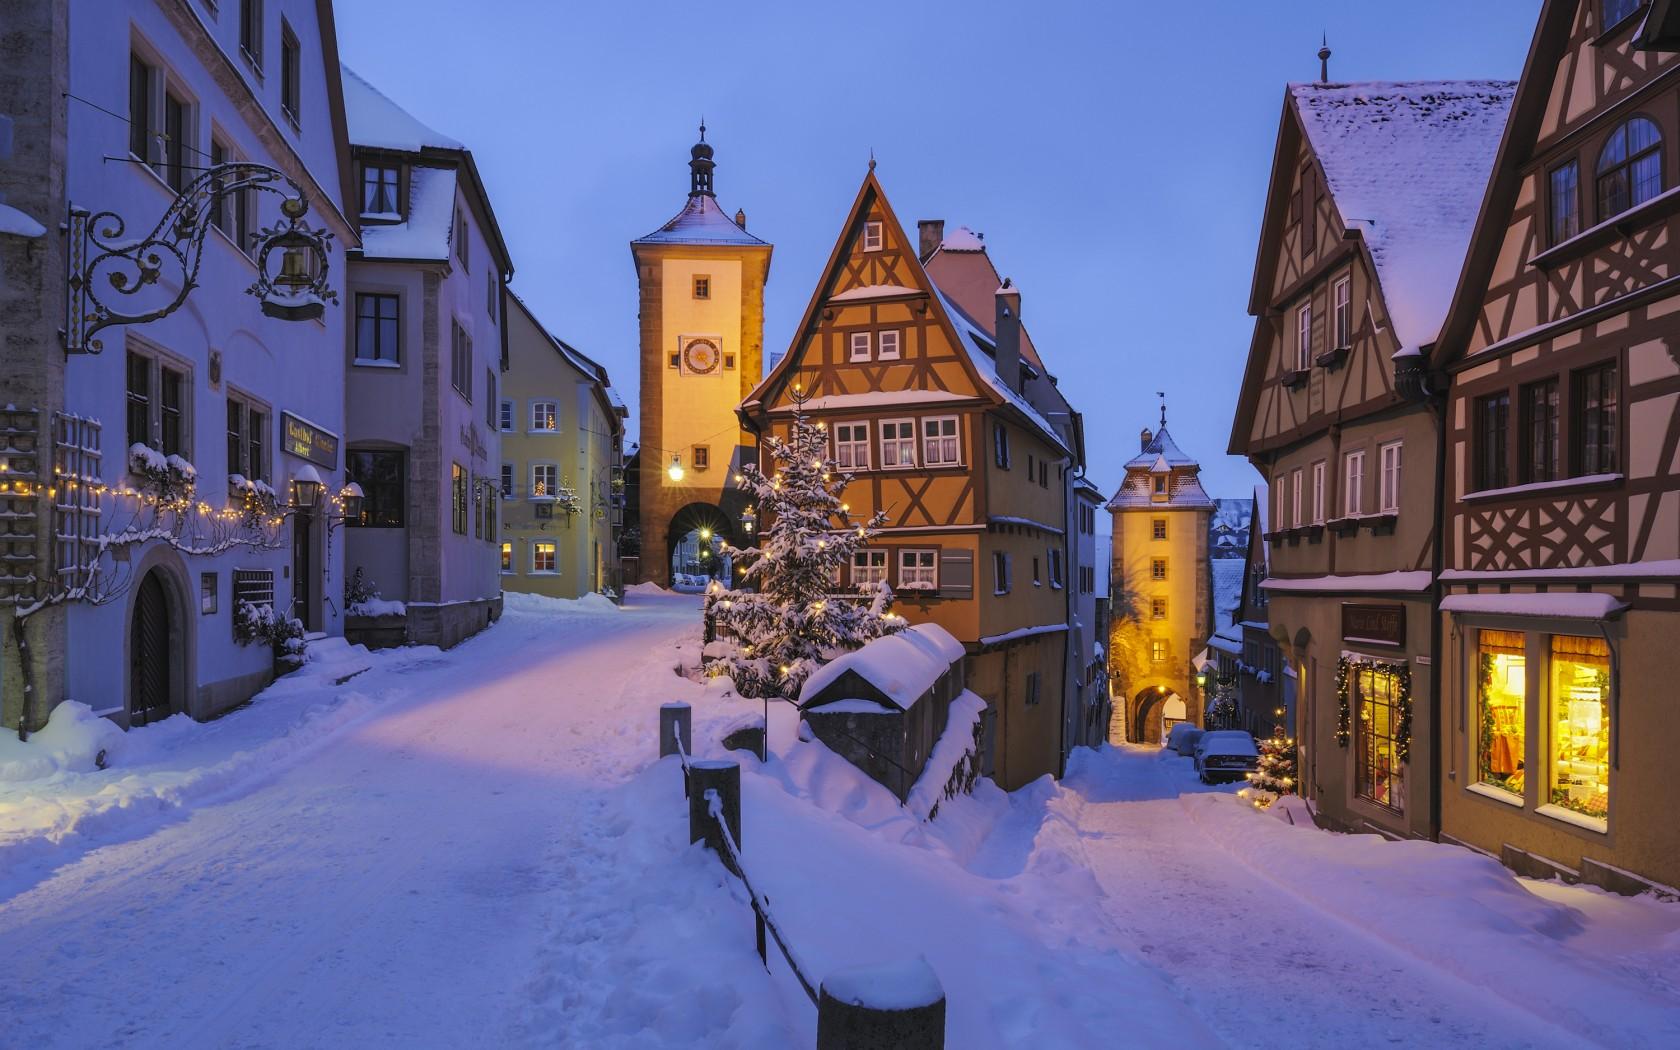 The town of Rothenburg ob der Tauber in Germany, on a winter